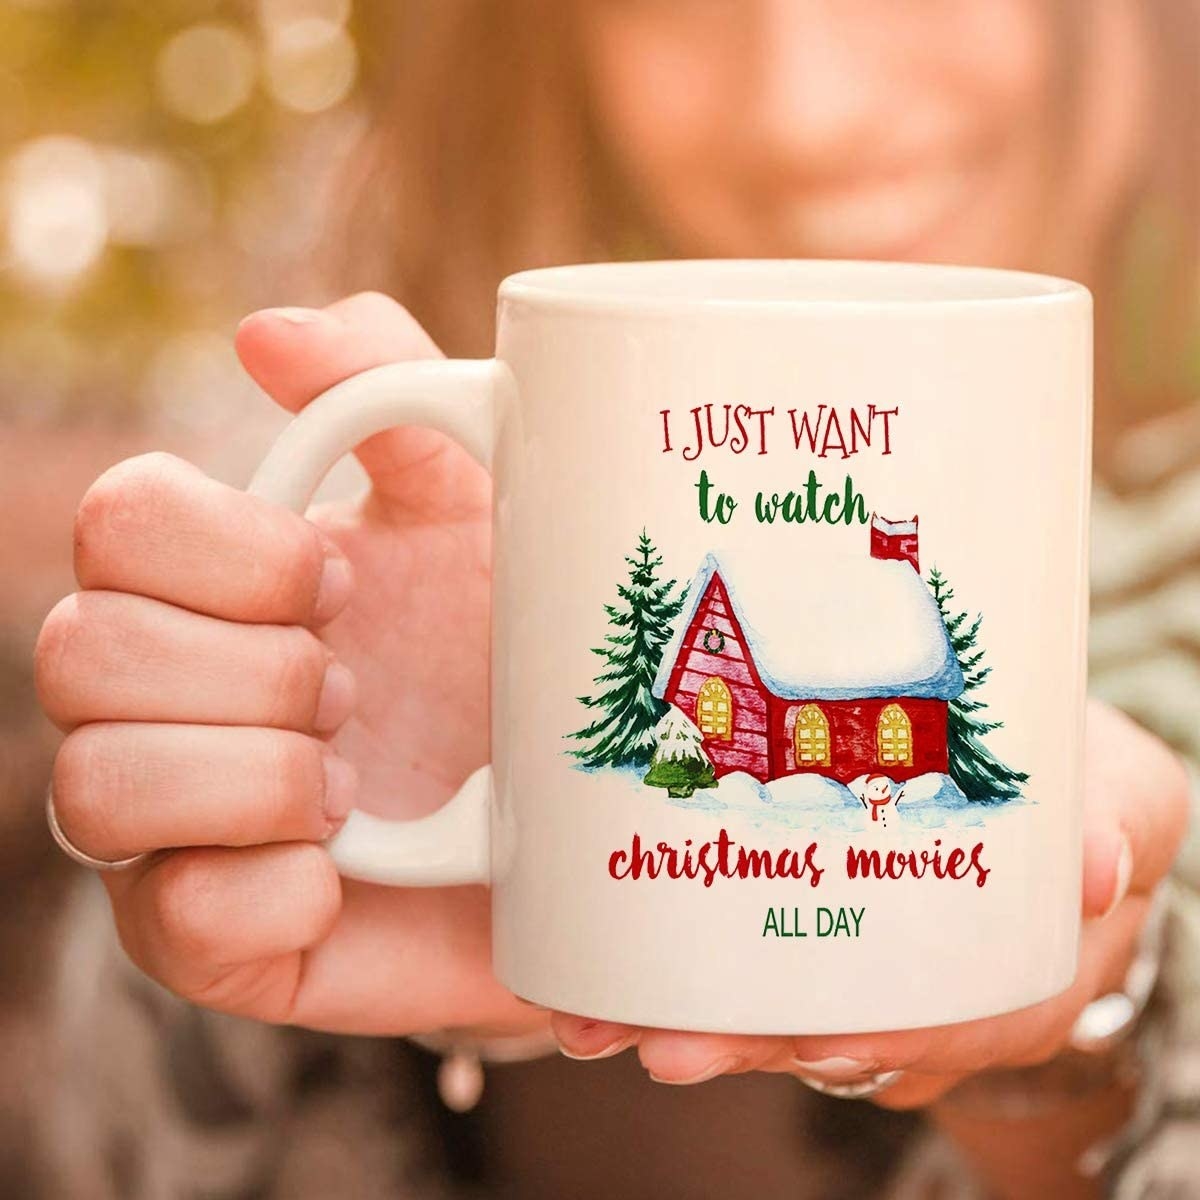 The mug with a snow-covered house and text I just want to watch christmas movies all day